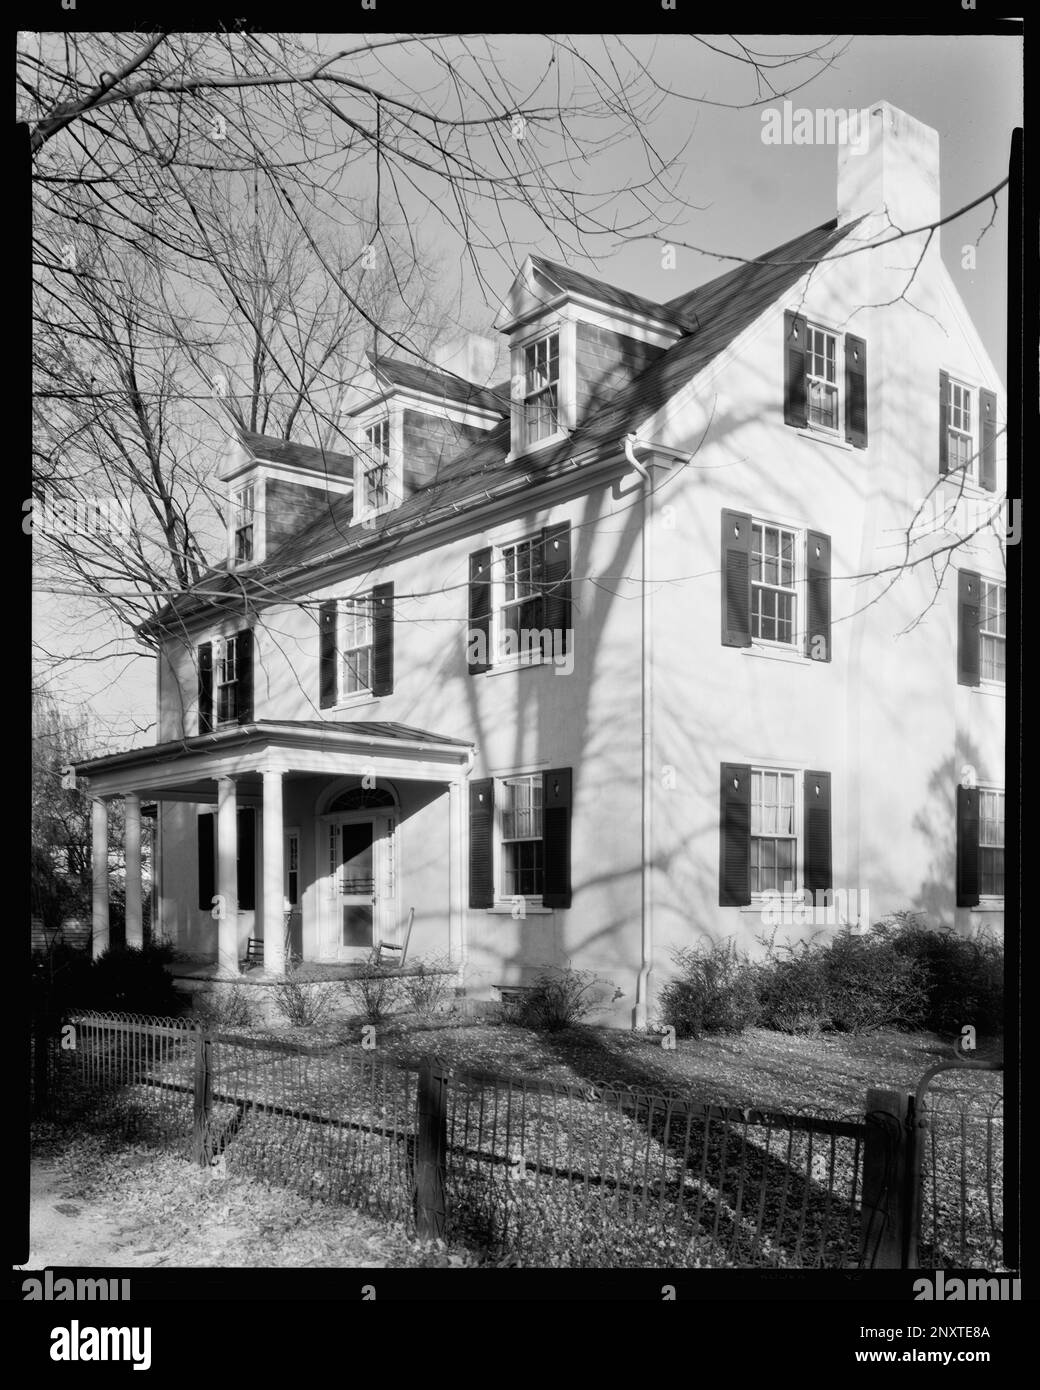 E. Marshall Rust Home, 320 North King Street, Leesburg, Loudoun County, Virginia. Carnegie Survey of the Architecture of the South. United States  Virginia  Loudoun County  Leesburg, Porches, Dormers, Houses. Stock Photo